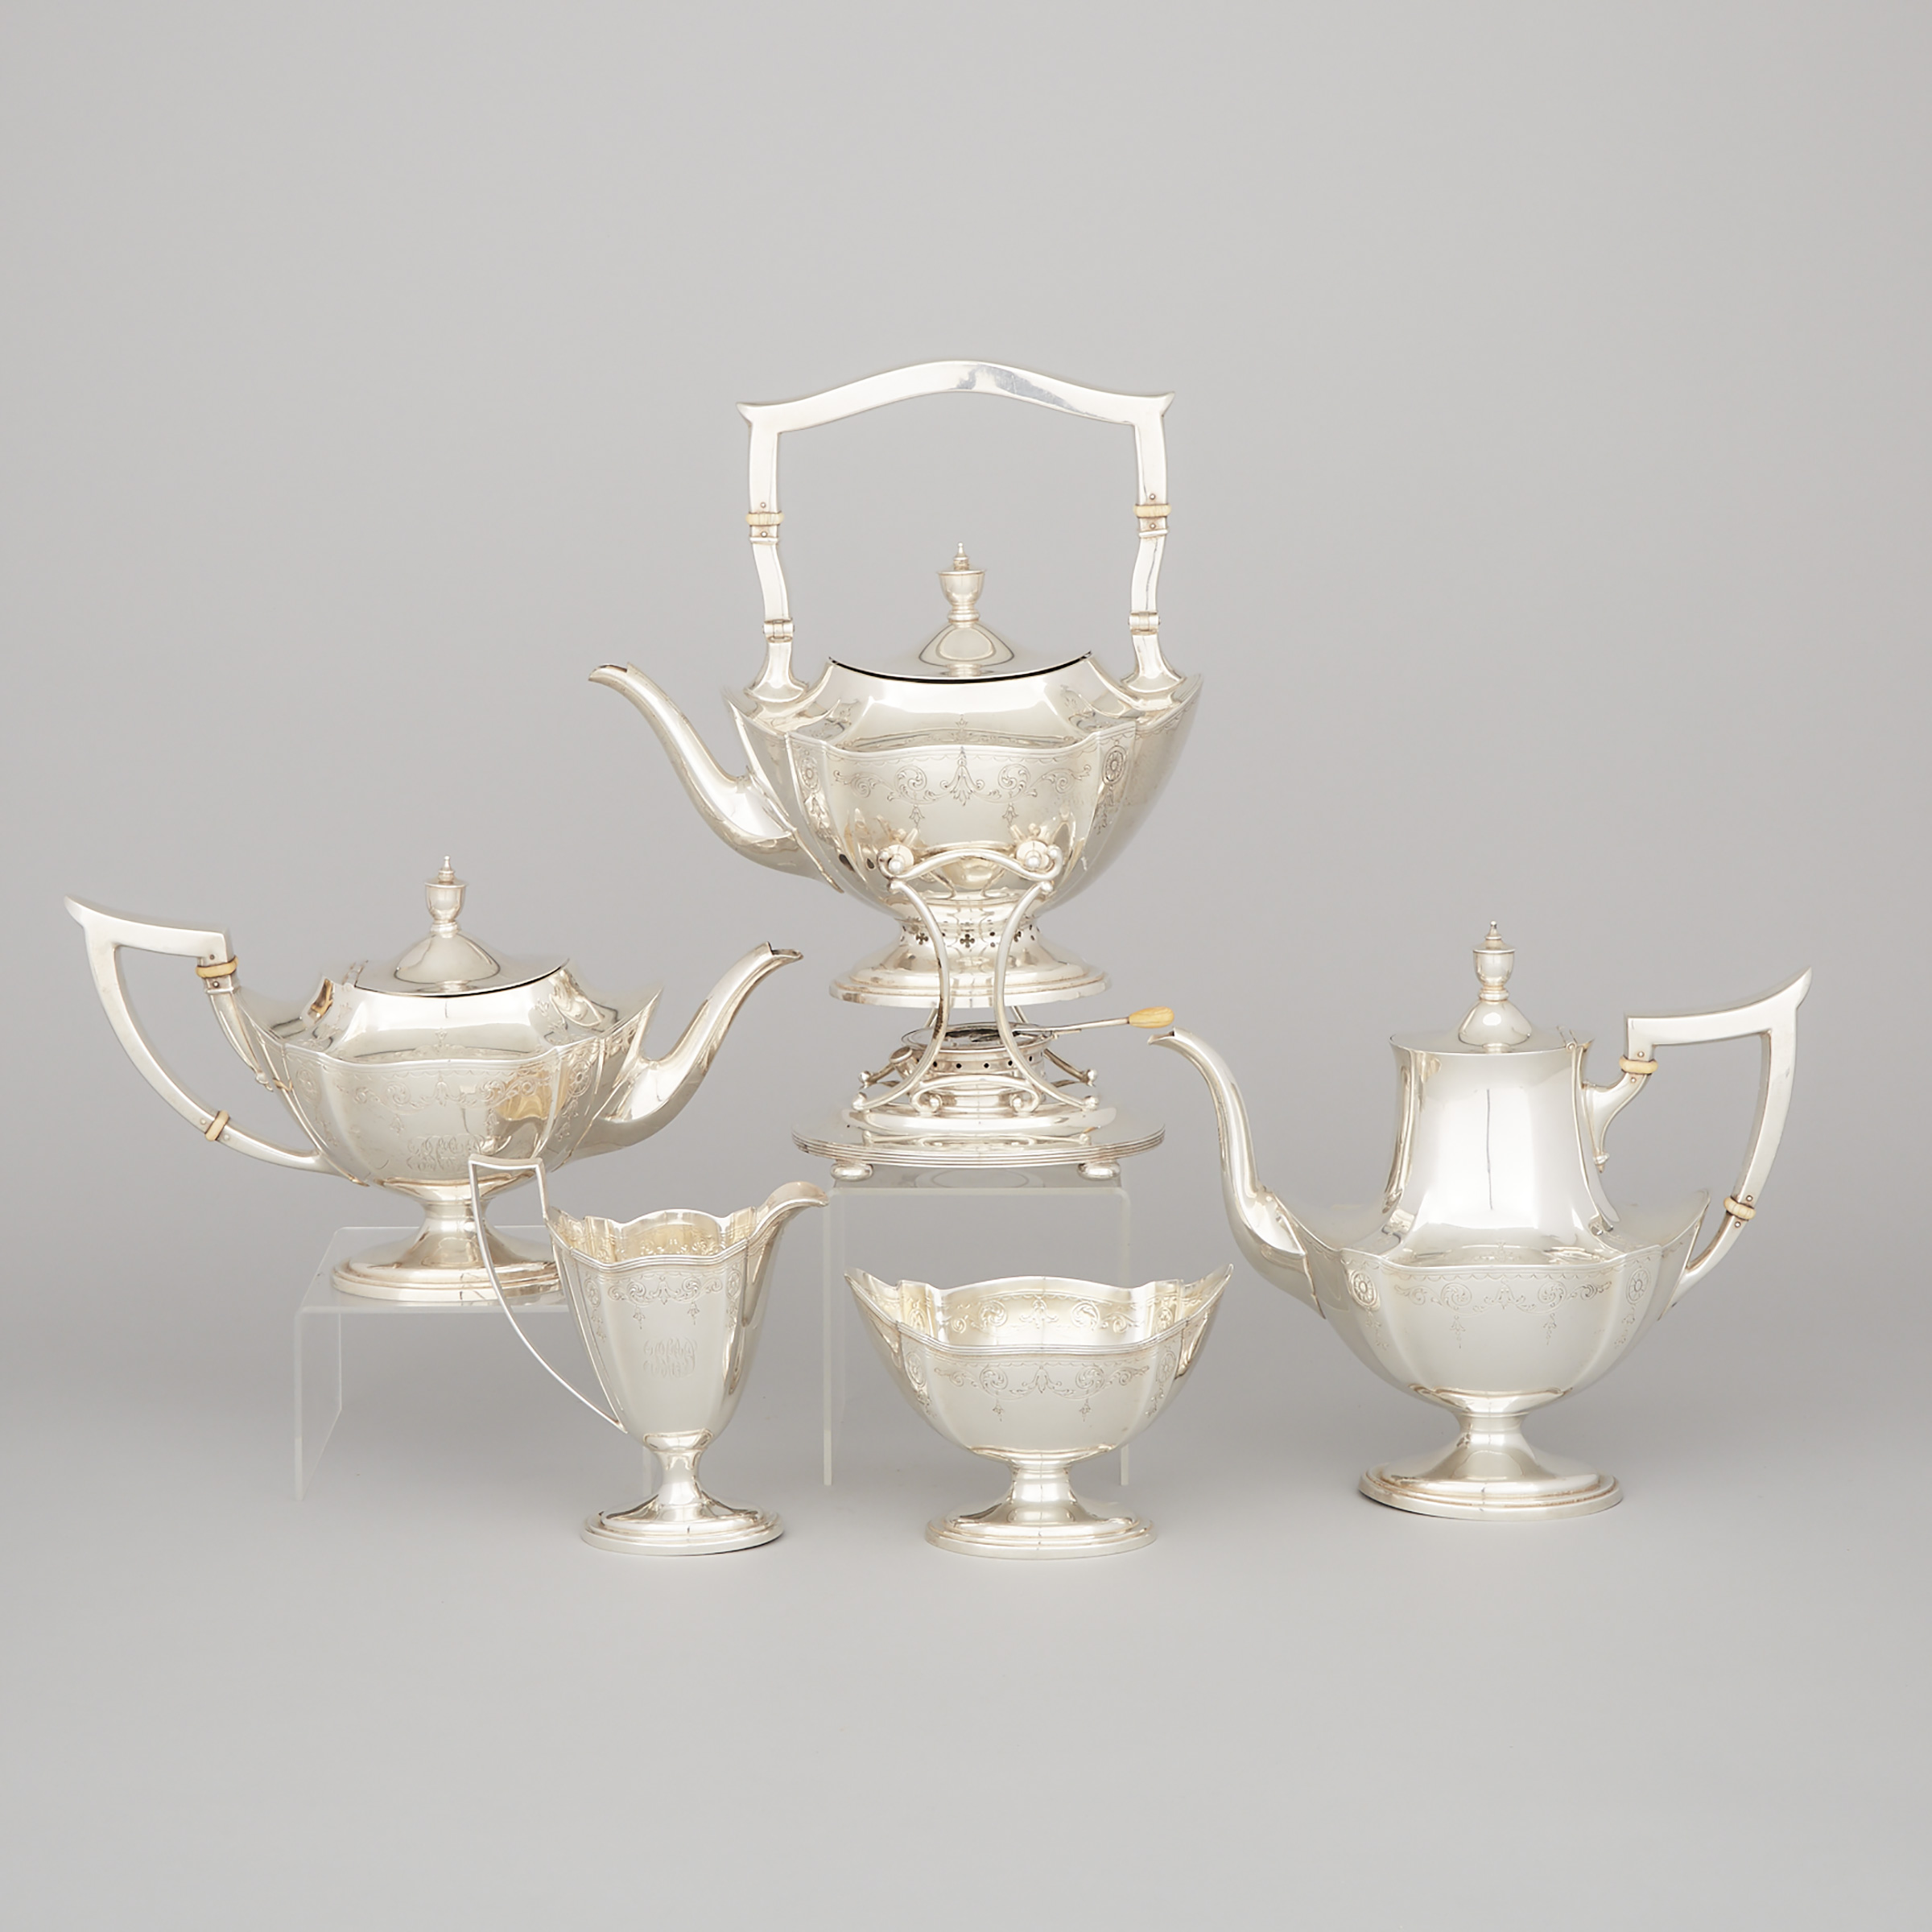 American Silver Tea and Coffee Service, Gorham Mfg. Co., Providence, R.I., 1915